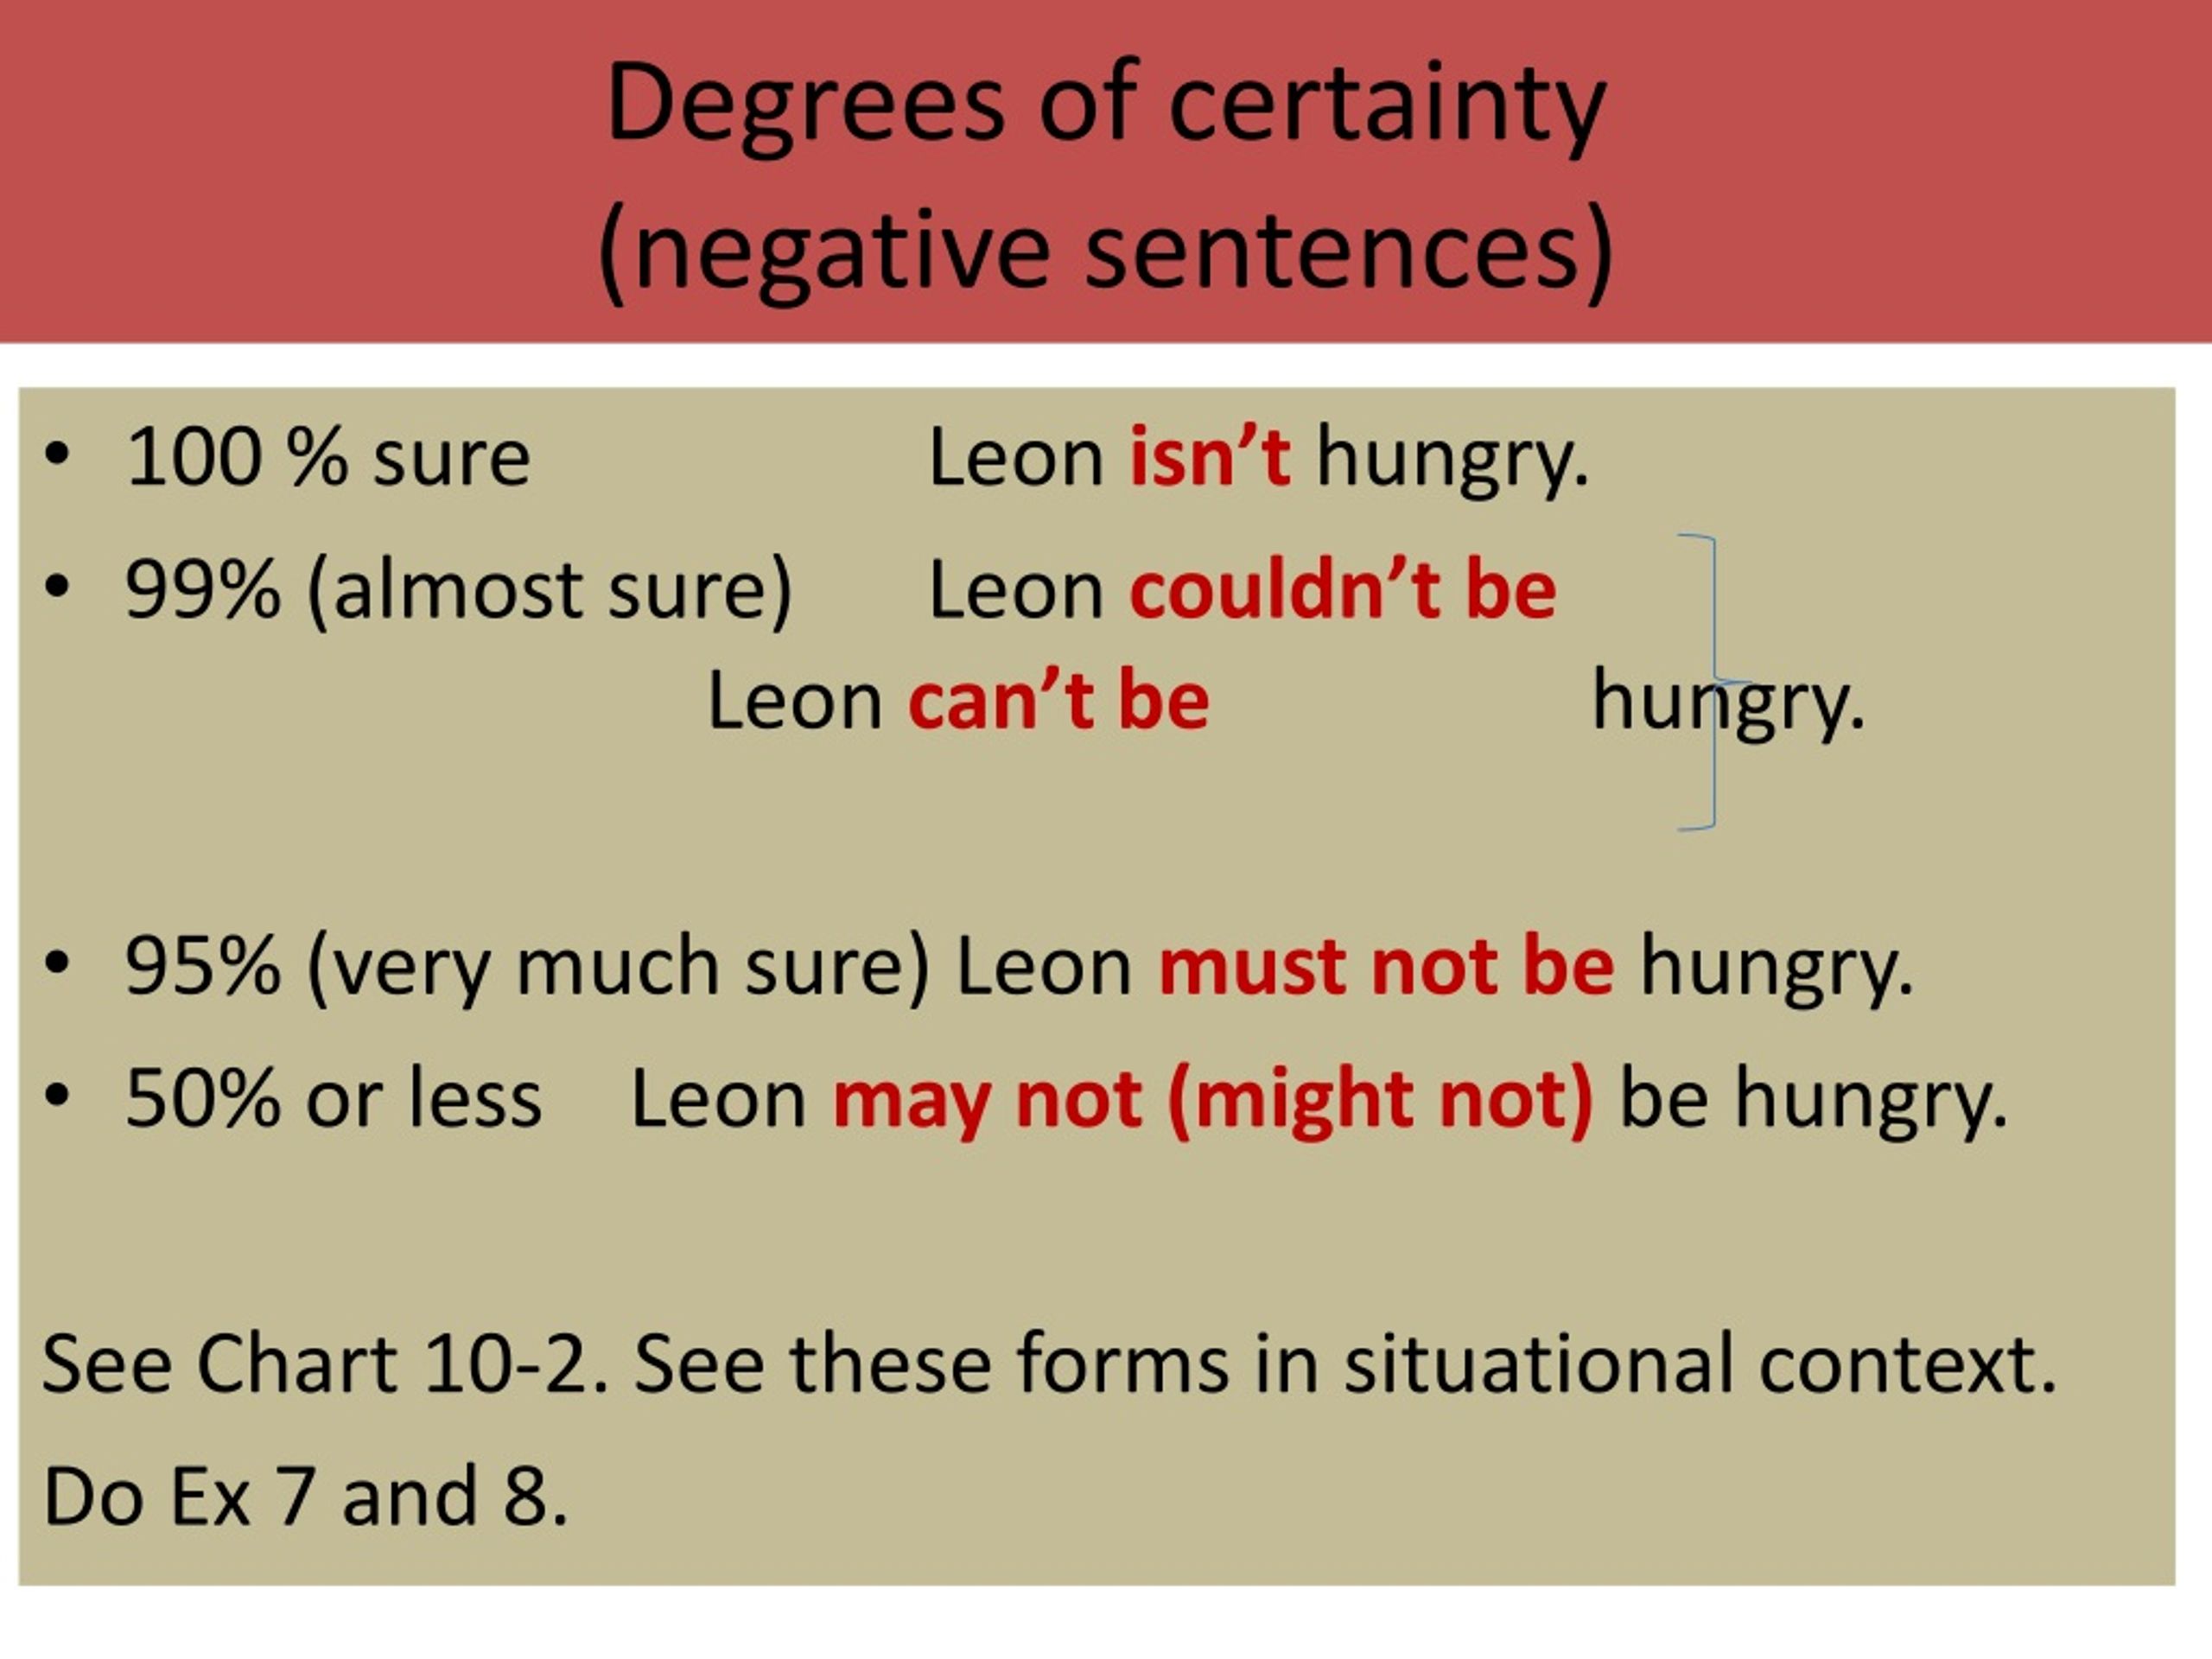 Adverbs of possibility and probability. Modals of certainty. Degrees of certainty. Degrees of certainty modal verbs. Degrees of certainty правило.